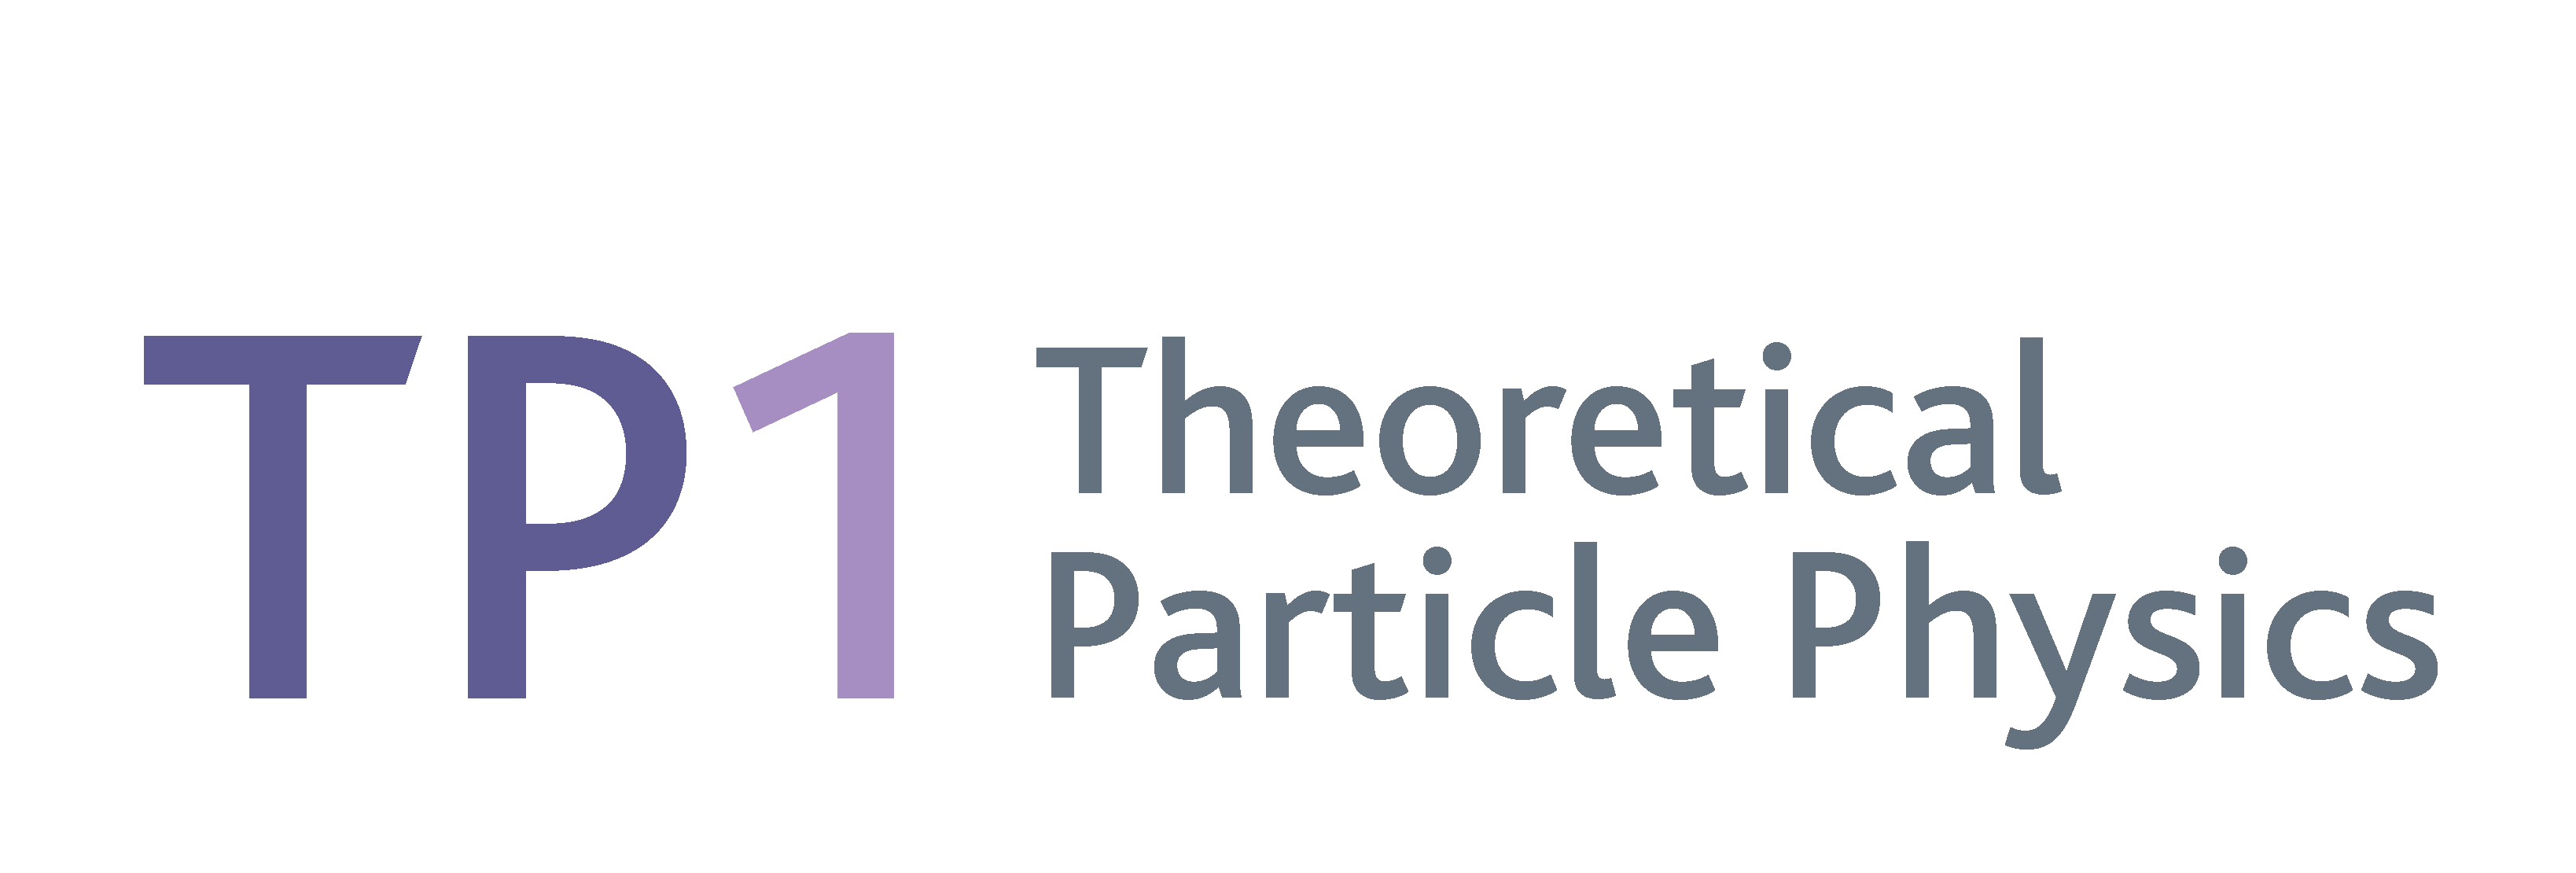 Theoretical Particle Physics